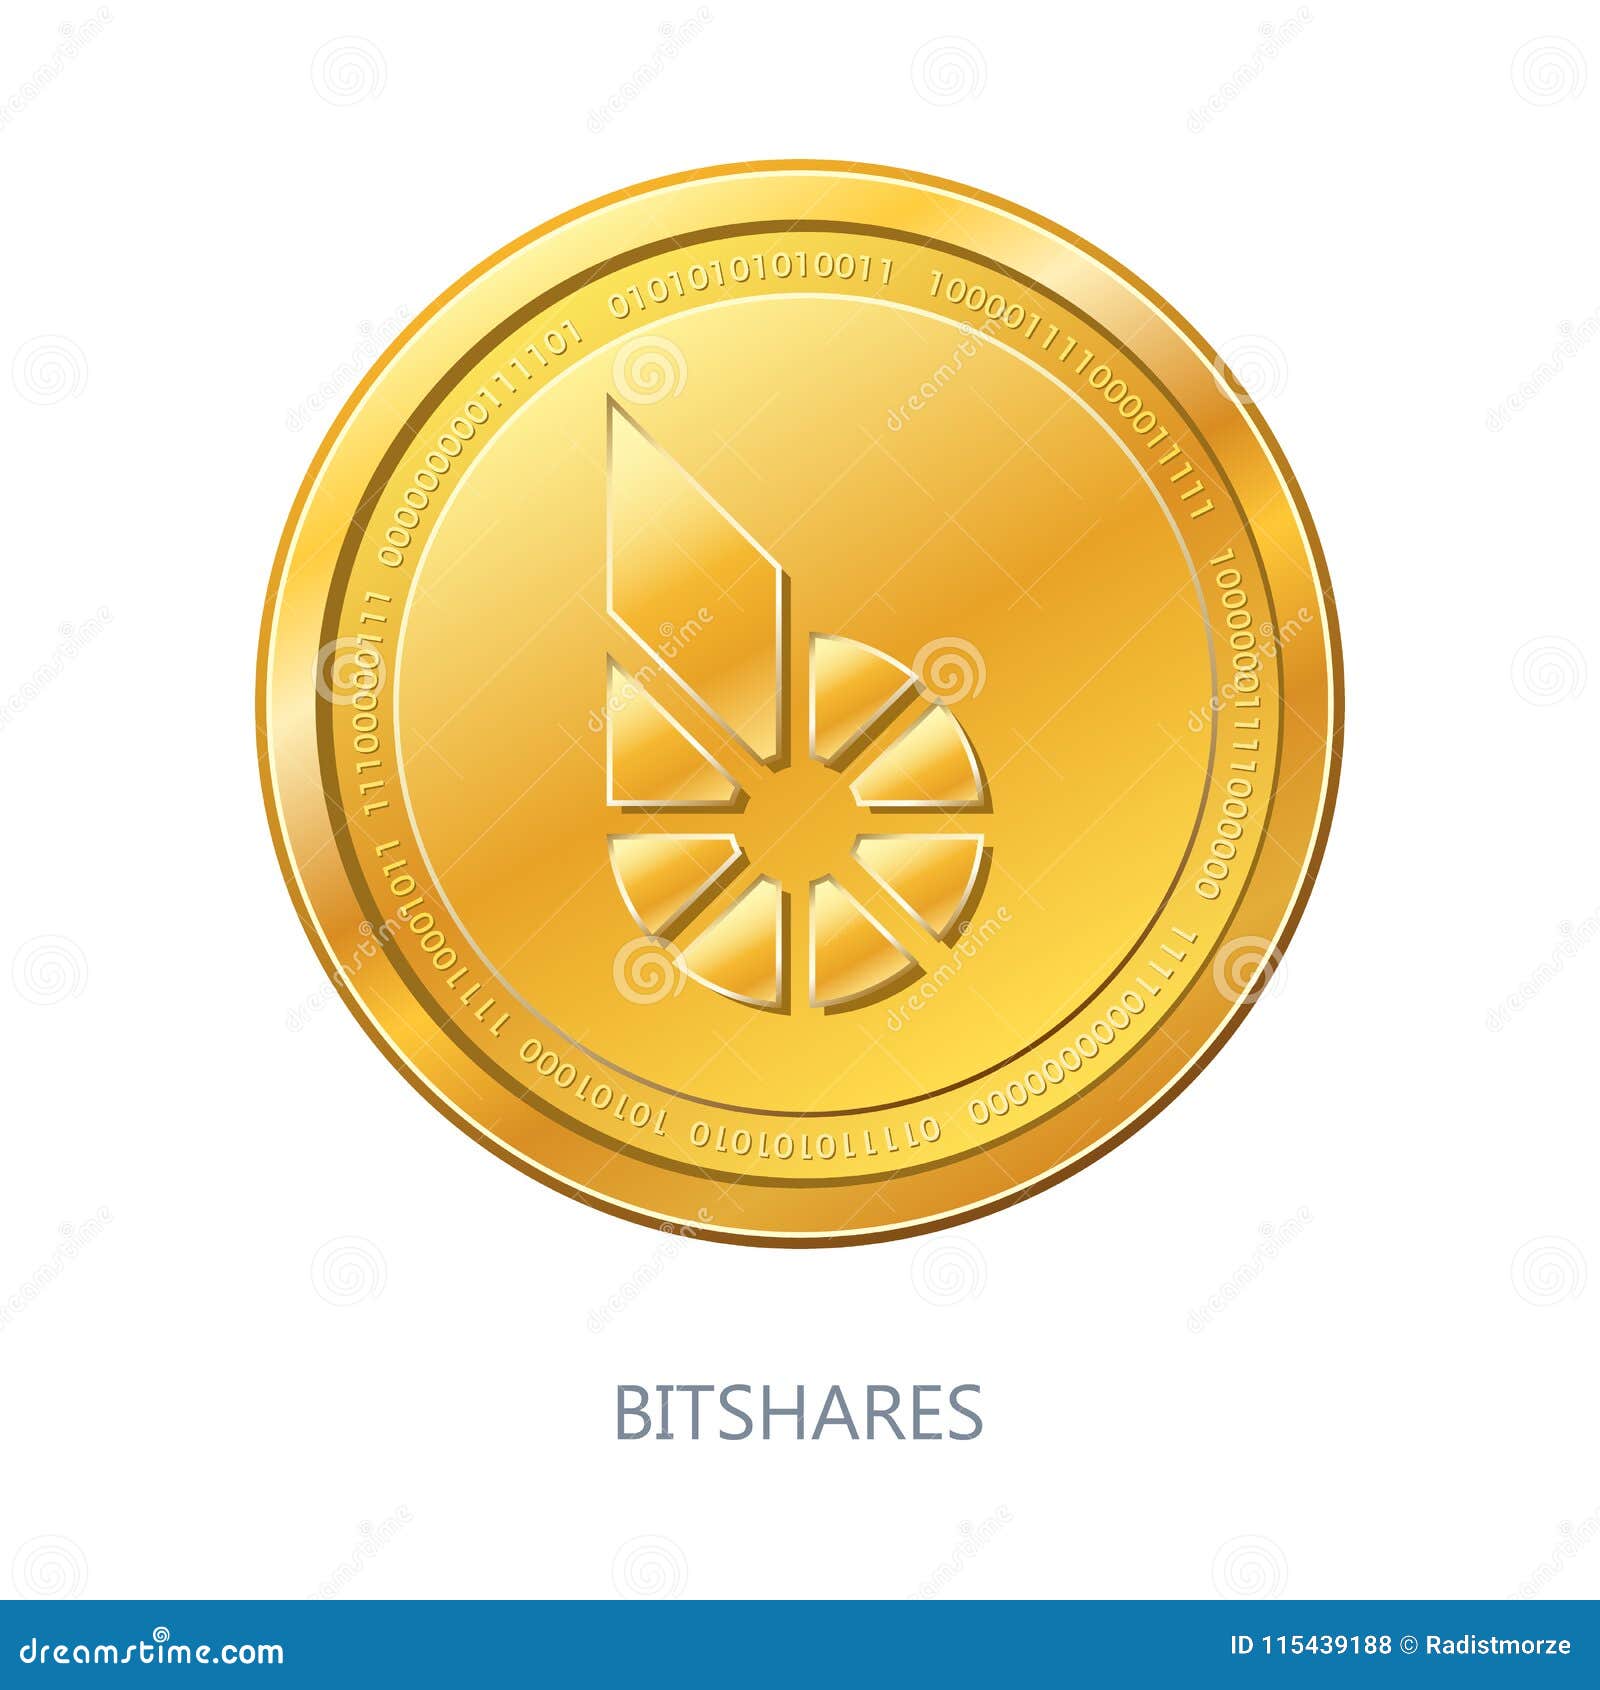 Cryptocurrency BitShares Coin Stock Illustration ...